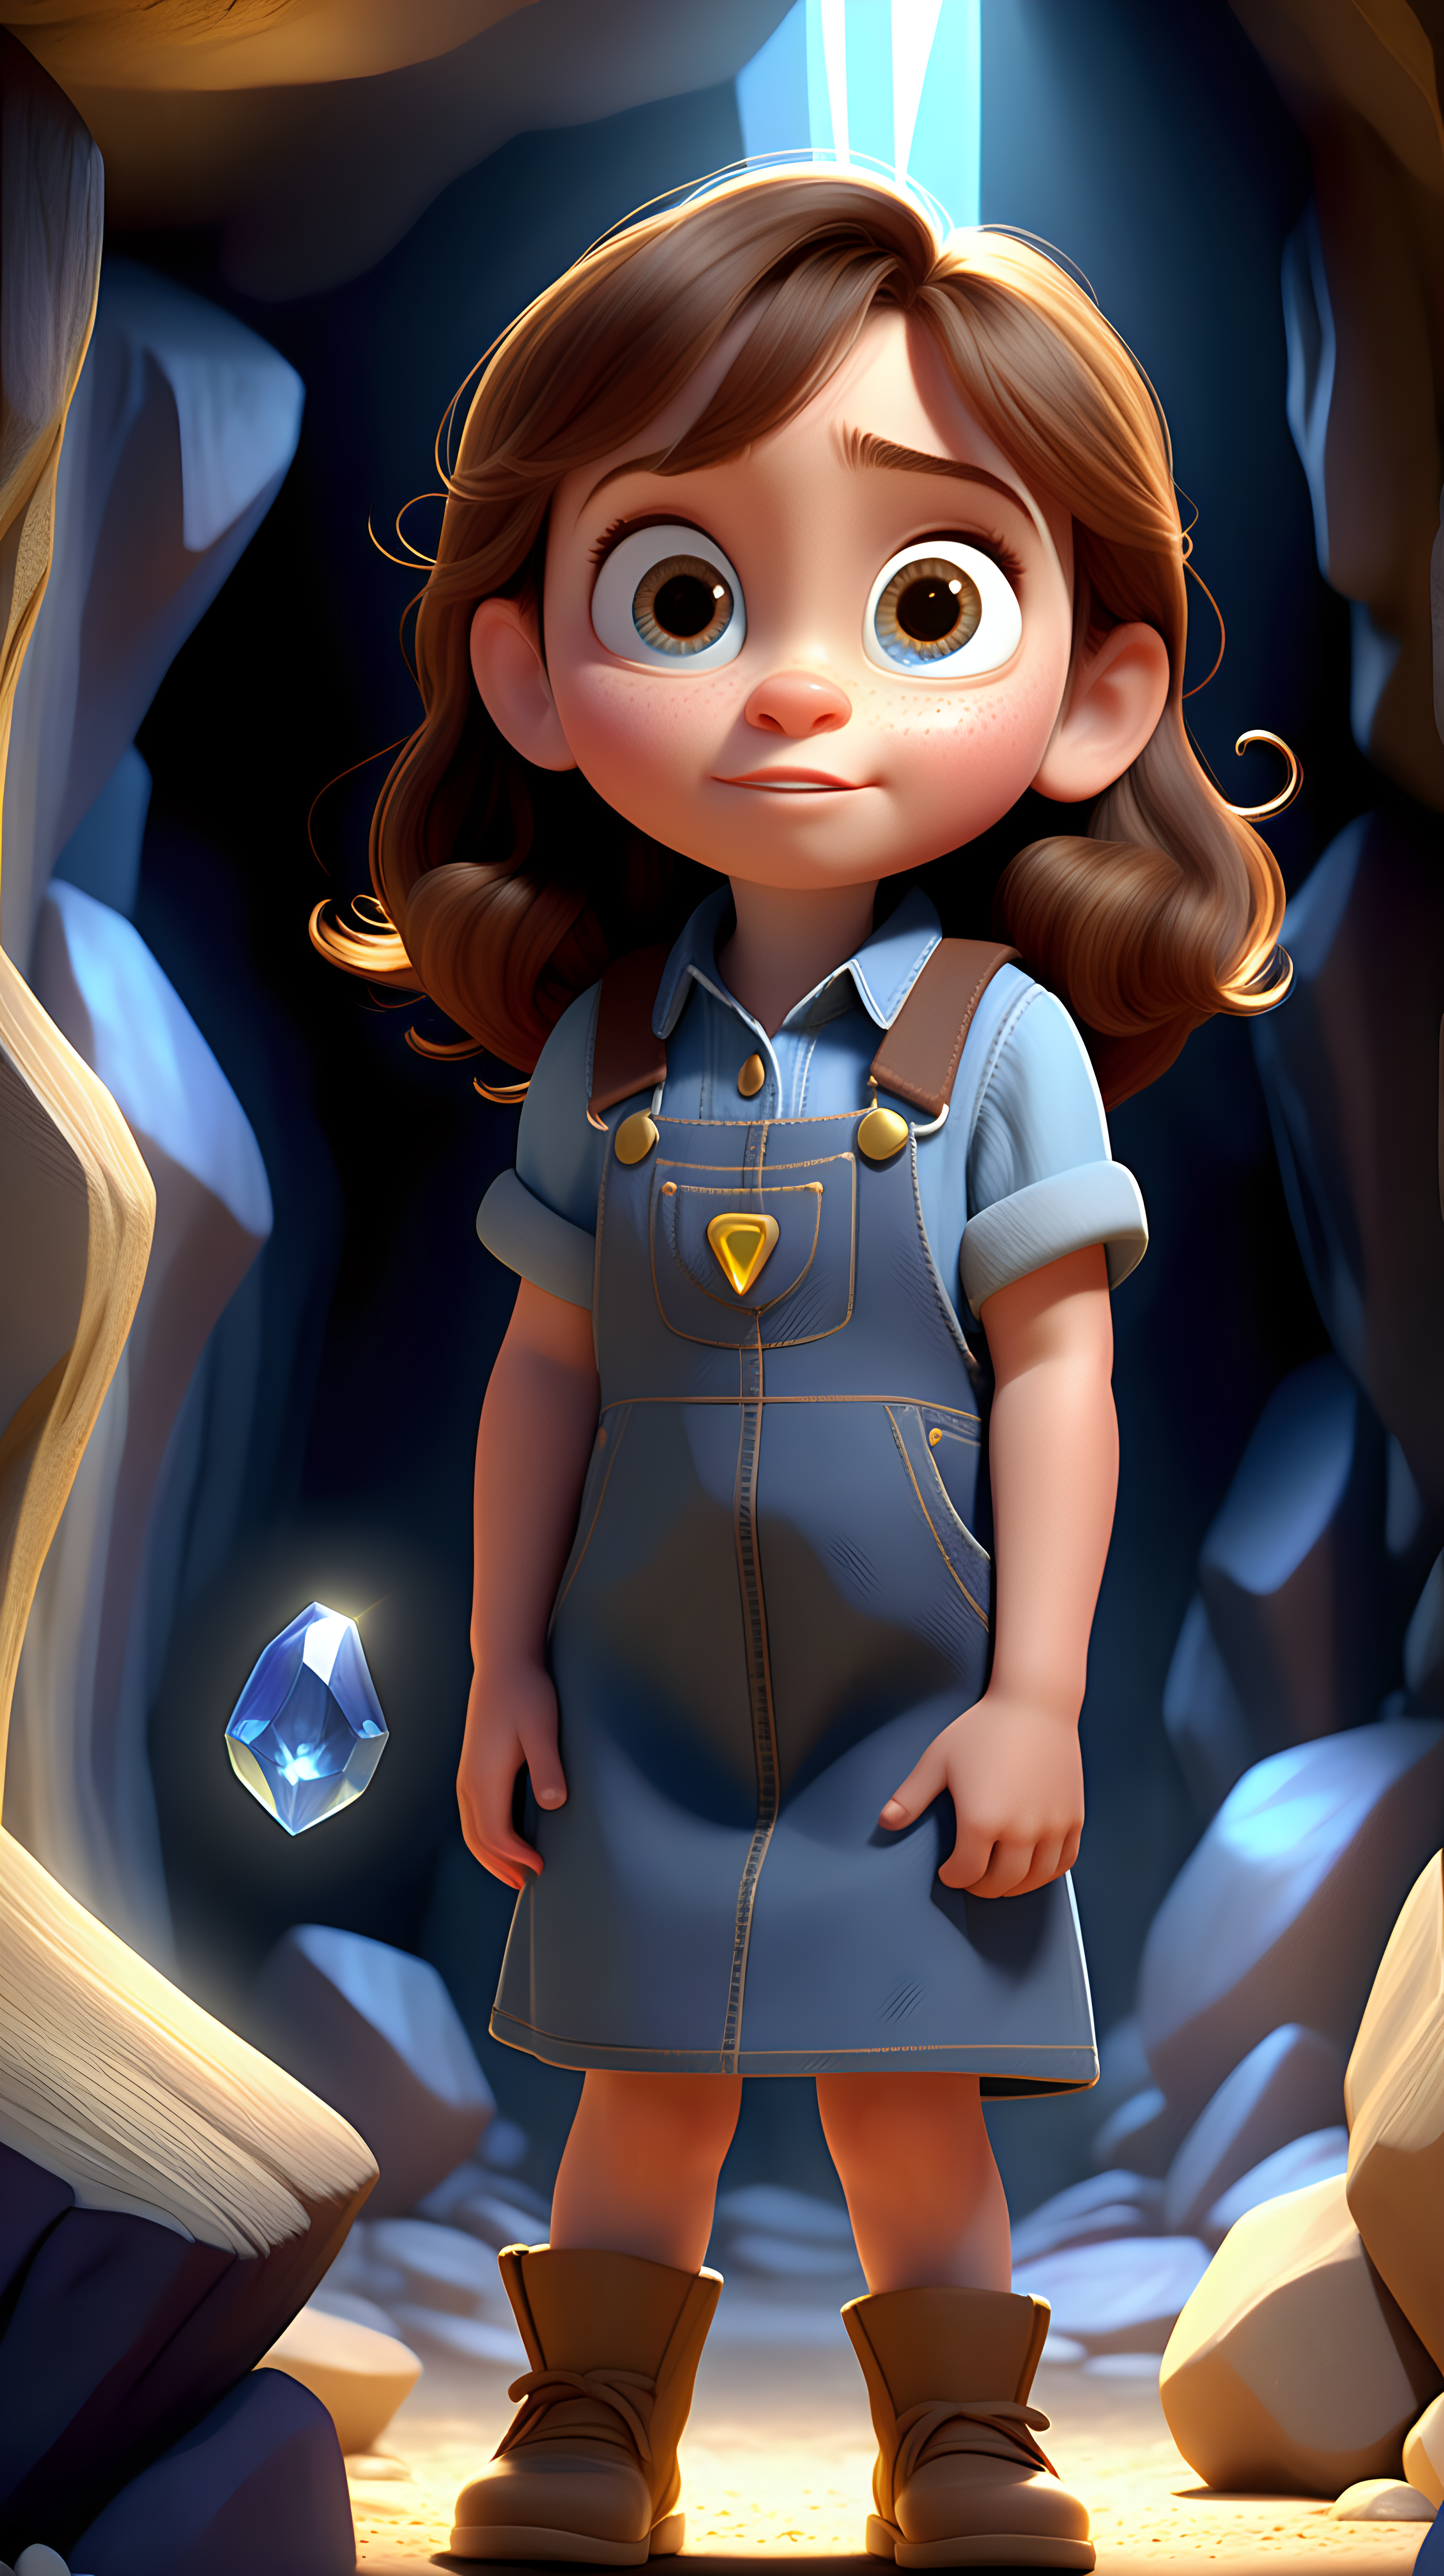 imagine 4 year old small girl with brown hair, fair skin, light brown eyes, wearing a denim dress overall, and a blue shirt, use Pixar style animation, make it full body size, standing inside a cave holding a Yellow crystal and a blue crystal